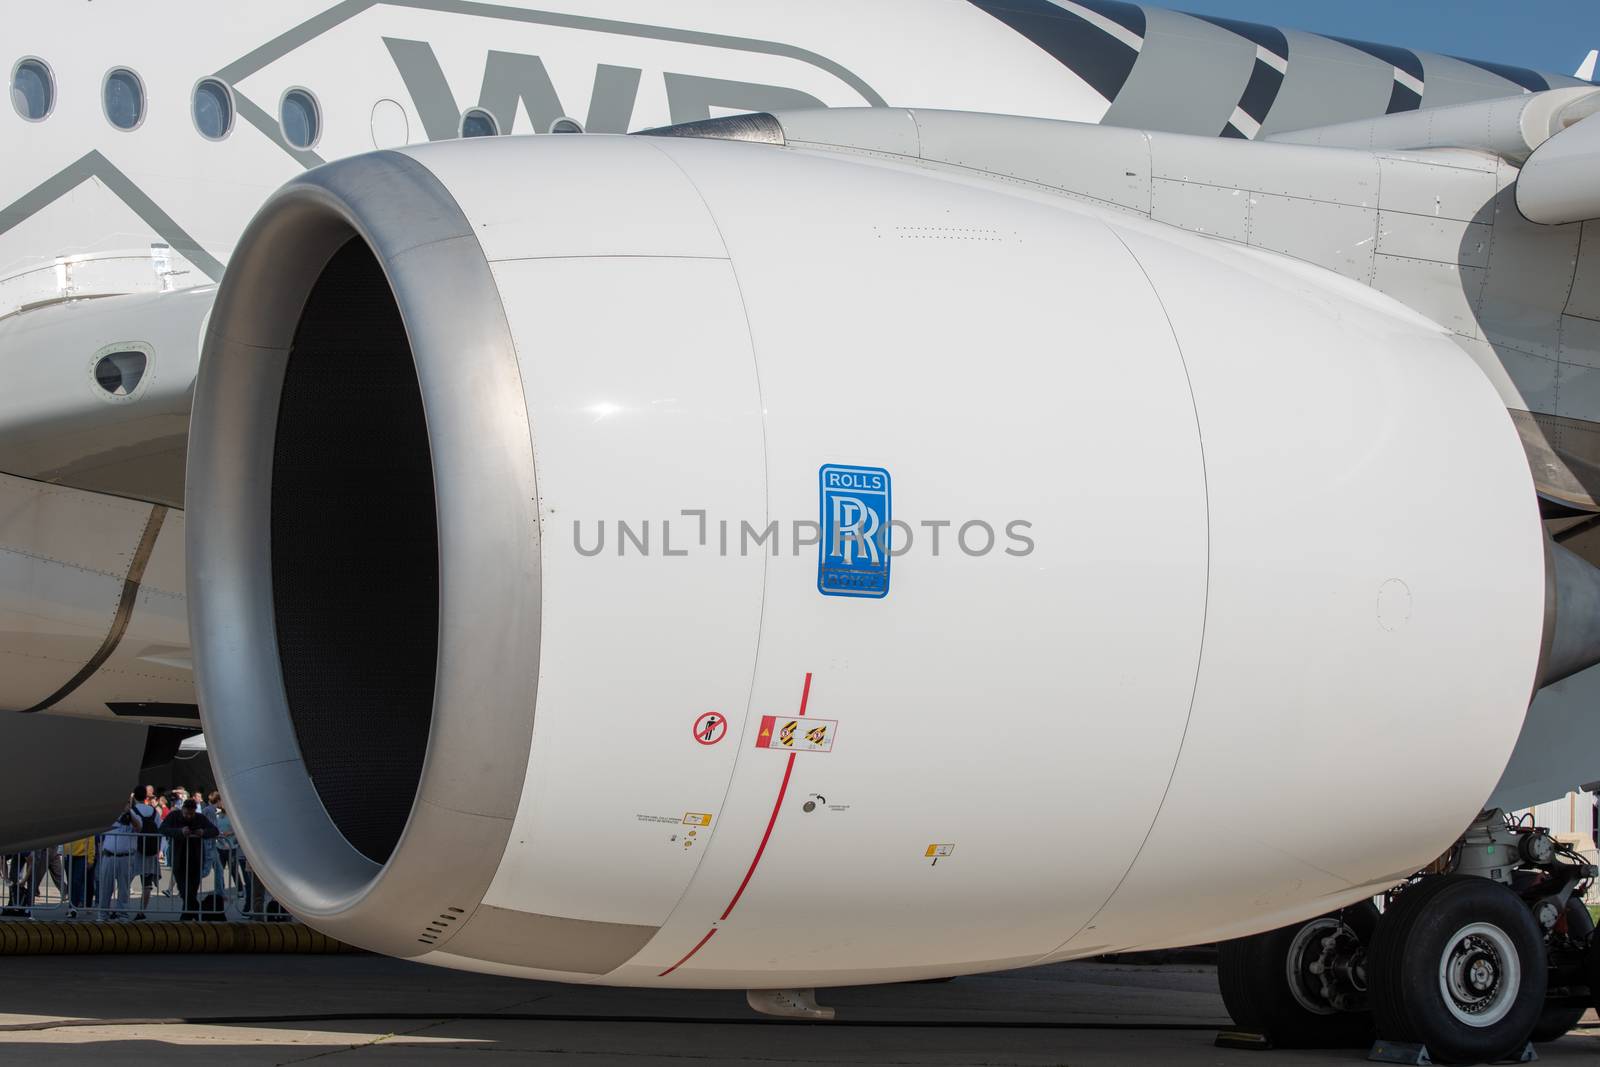 August 30, 2019. Zhukovsky, Russia. Aircraft engine Rolls-Royce Trent XWB long-range wide-body twin-engine passenger aircraft Airbus A350-900 XWB Airbus Industrie at the International Aviation and Space Salon MAKS 2019.